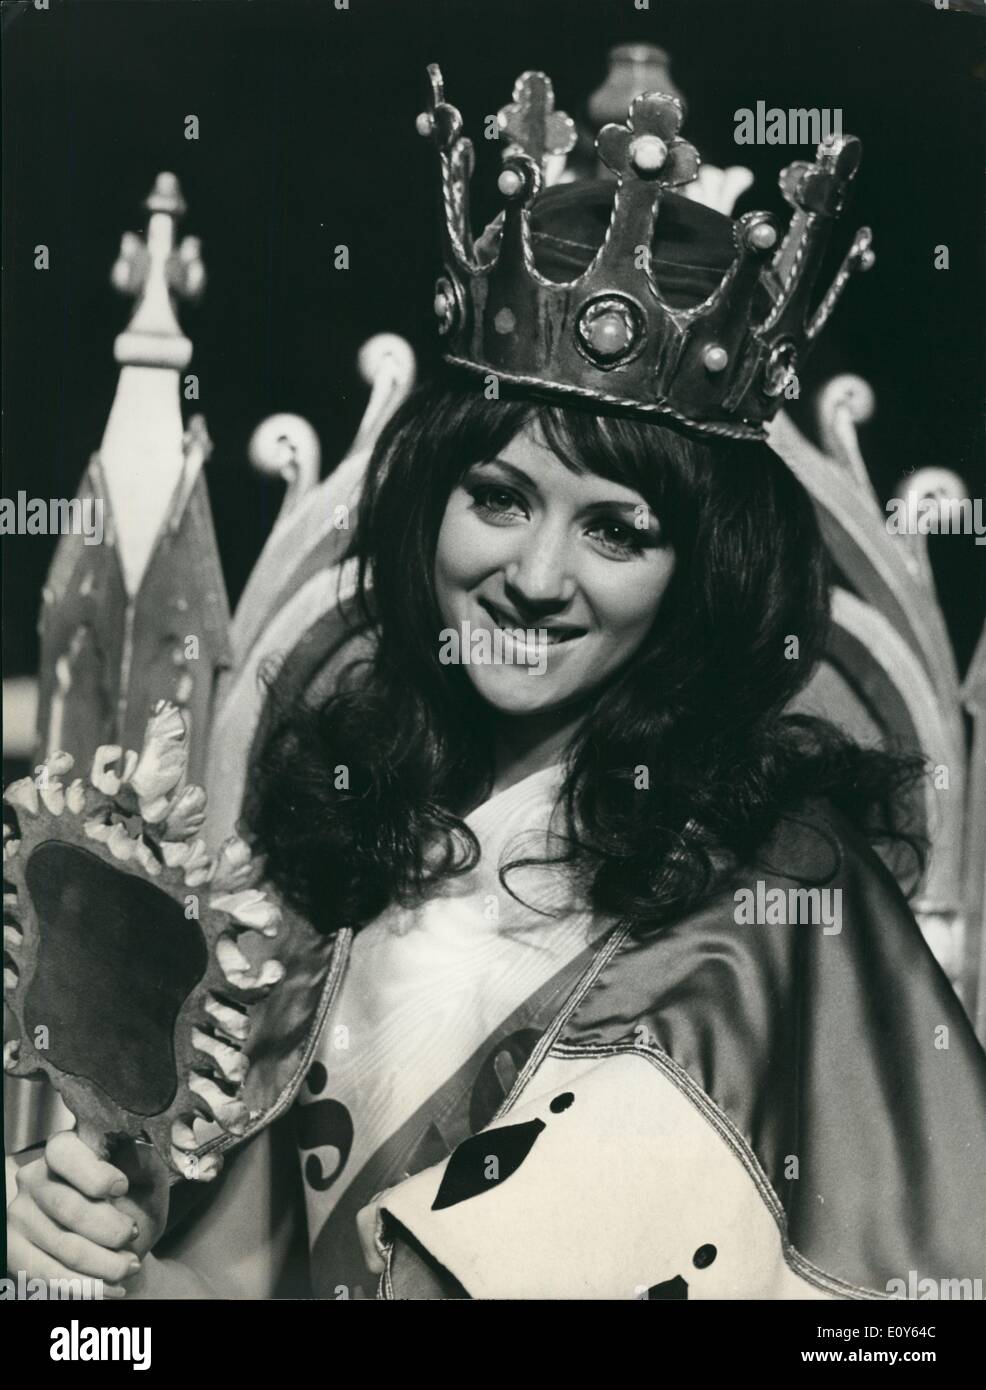 Mar. 03, 1969 - 18 years old Liselotte Pauli was elected Miss Switzerland 1969 at Berne today. She is a secretary and has no ambition for a film or mannequin career. Stock Photo